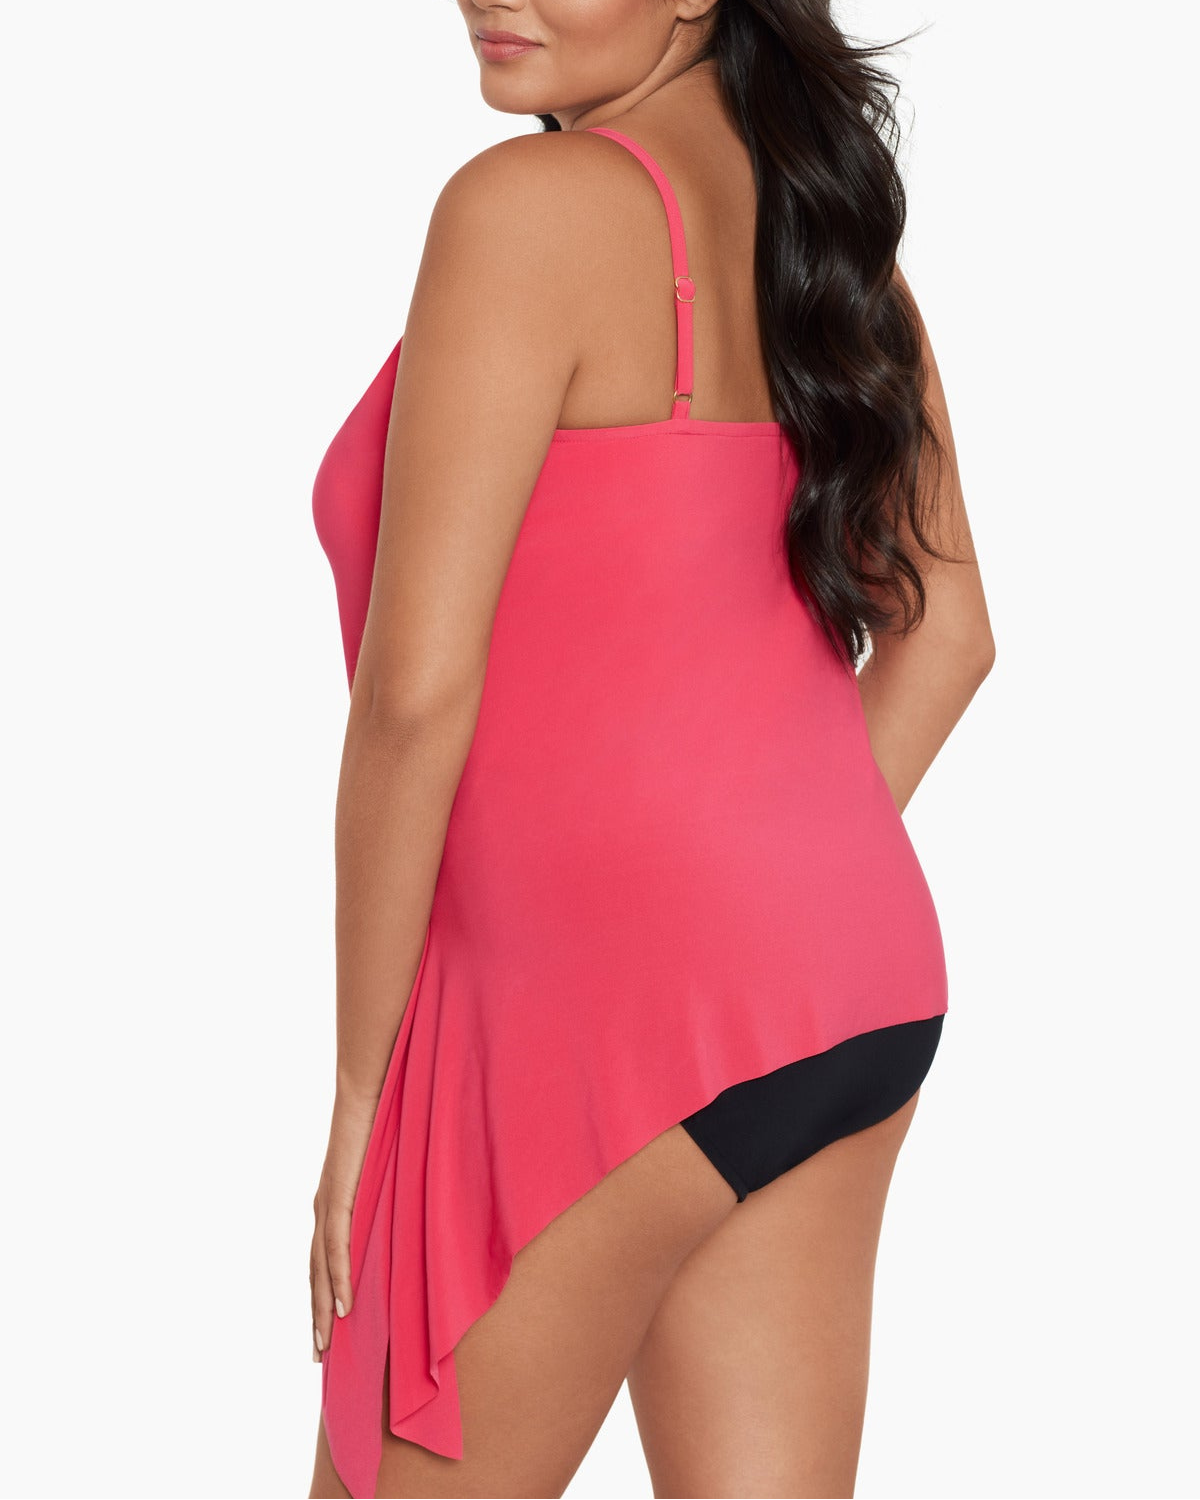 Model wearing a tankini top in black with hidden underwire, tie side and adjustable straps in coral pink